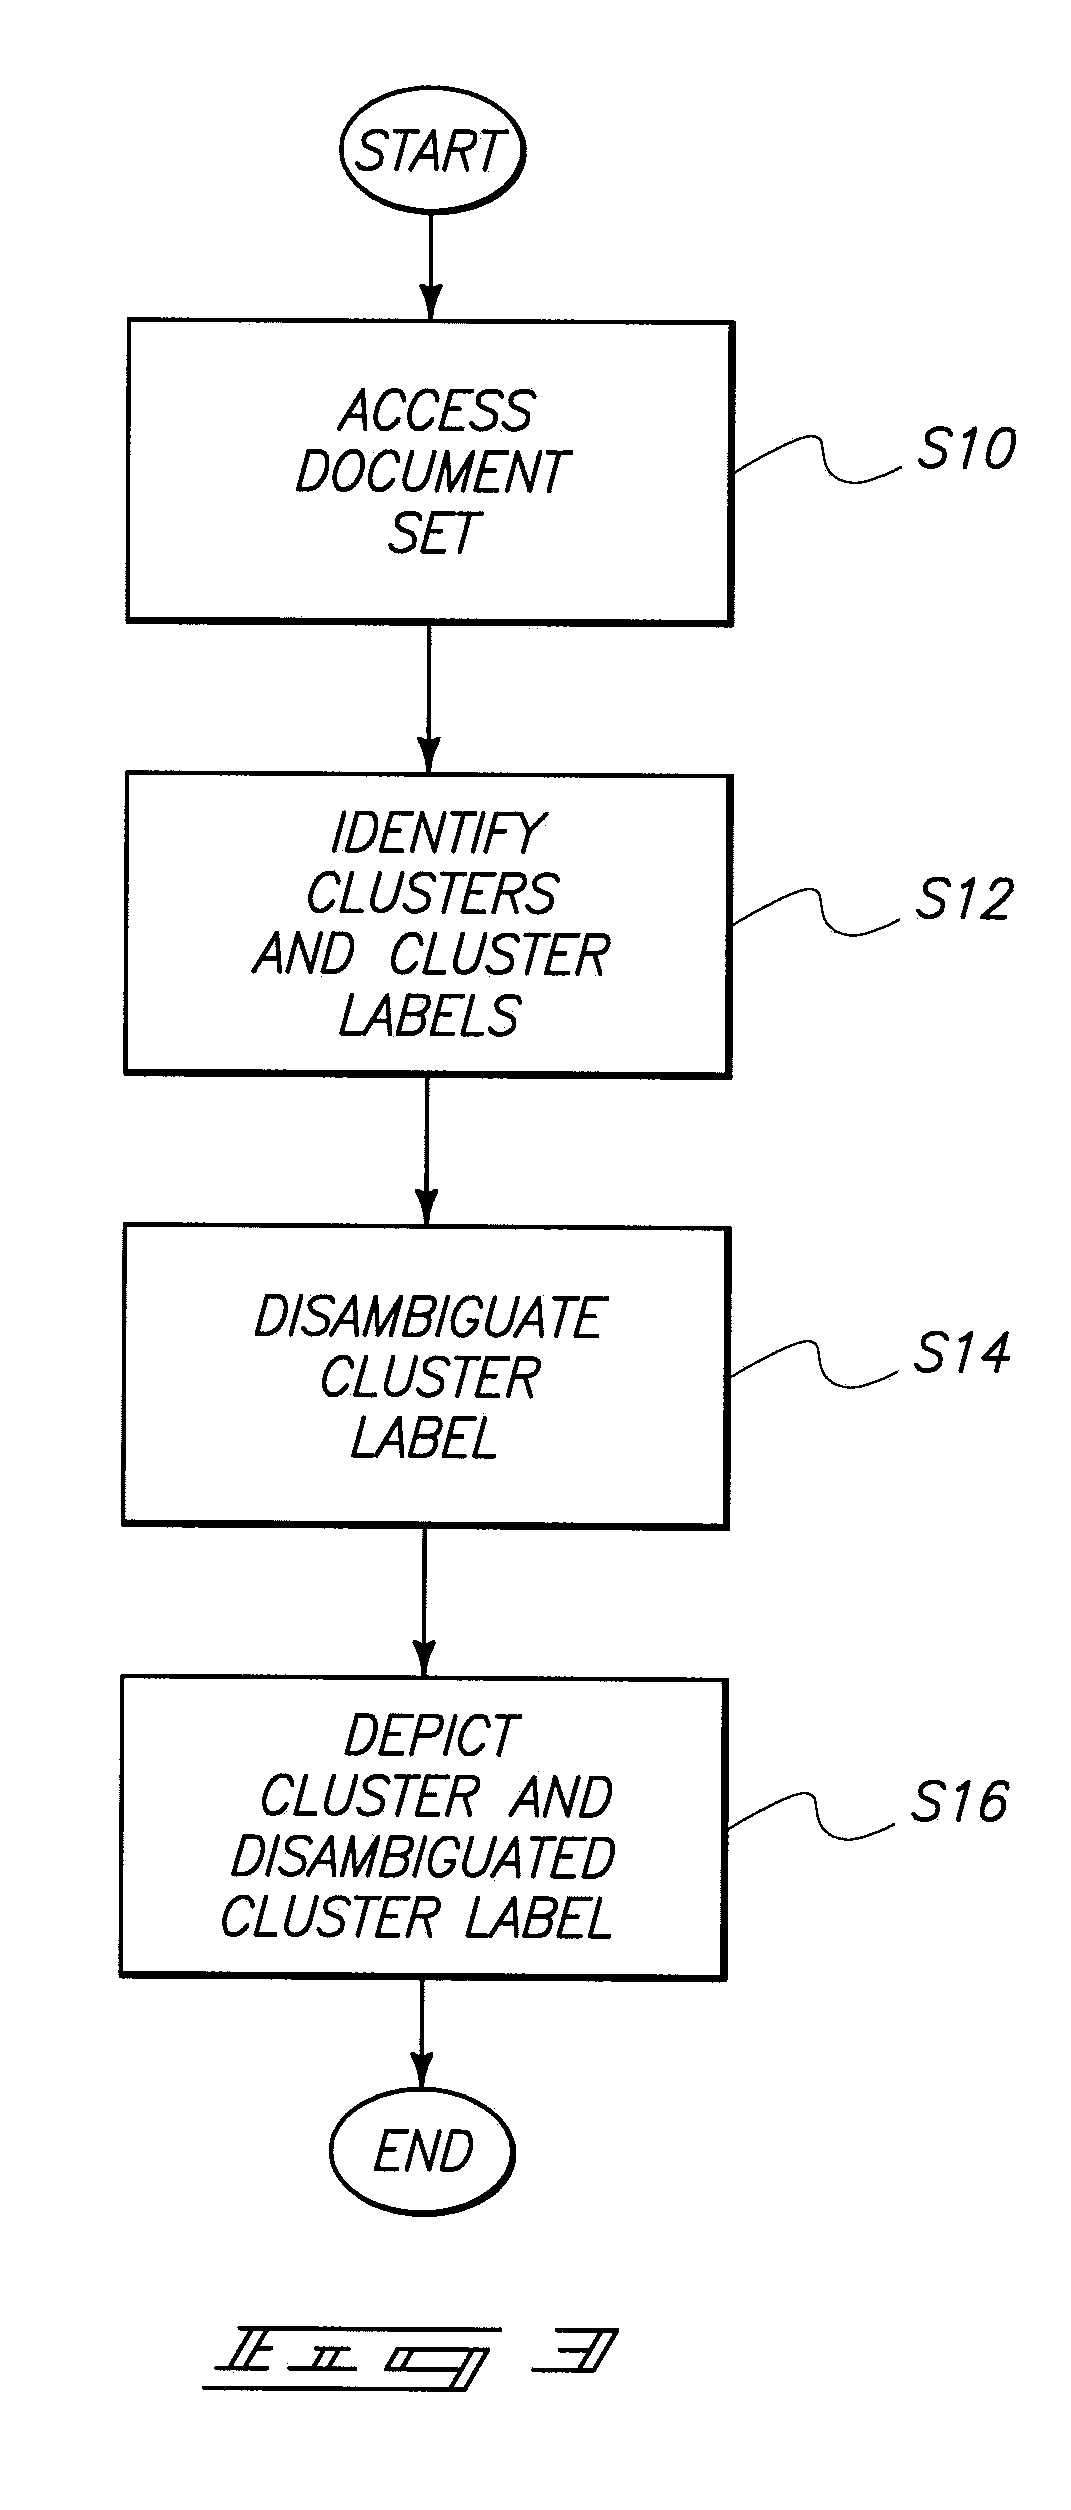 Document clustering methods, document cluster label disambiguation methods, document clustering apparatuses, and articles of manufacture